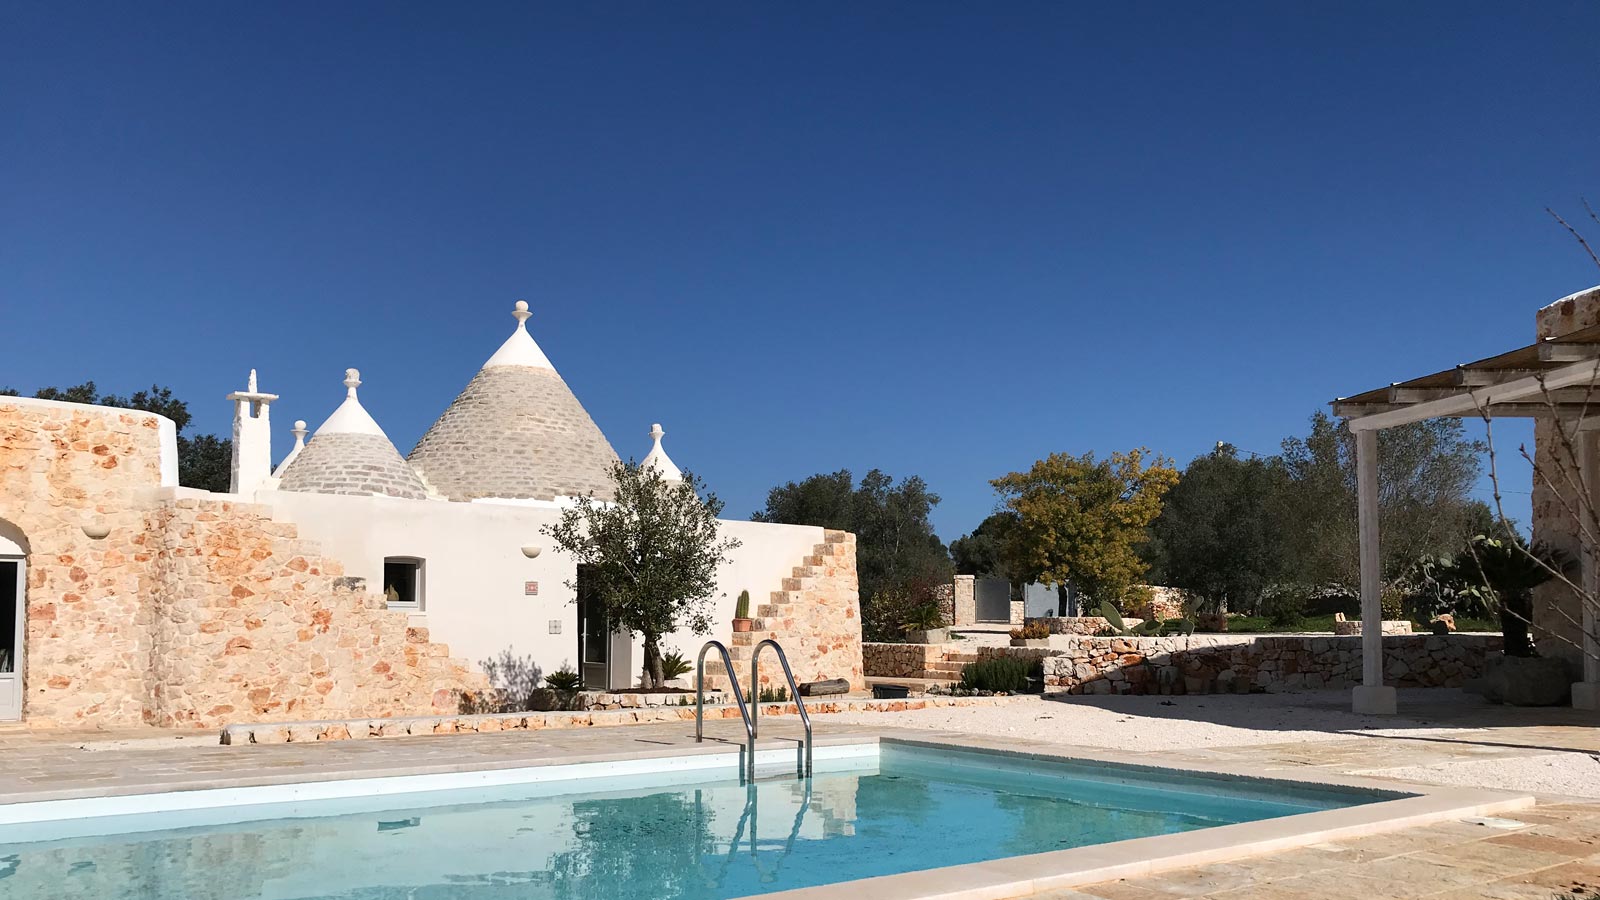 6 bedroom holiday accommodation in Puglia, Italy